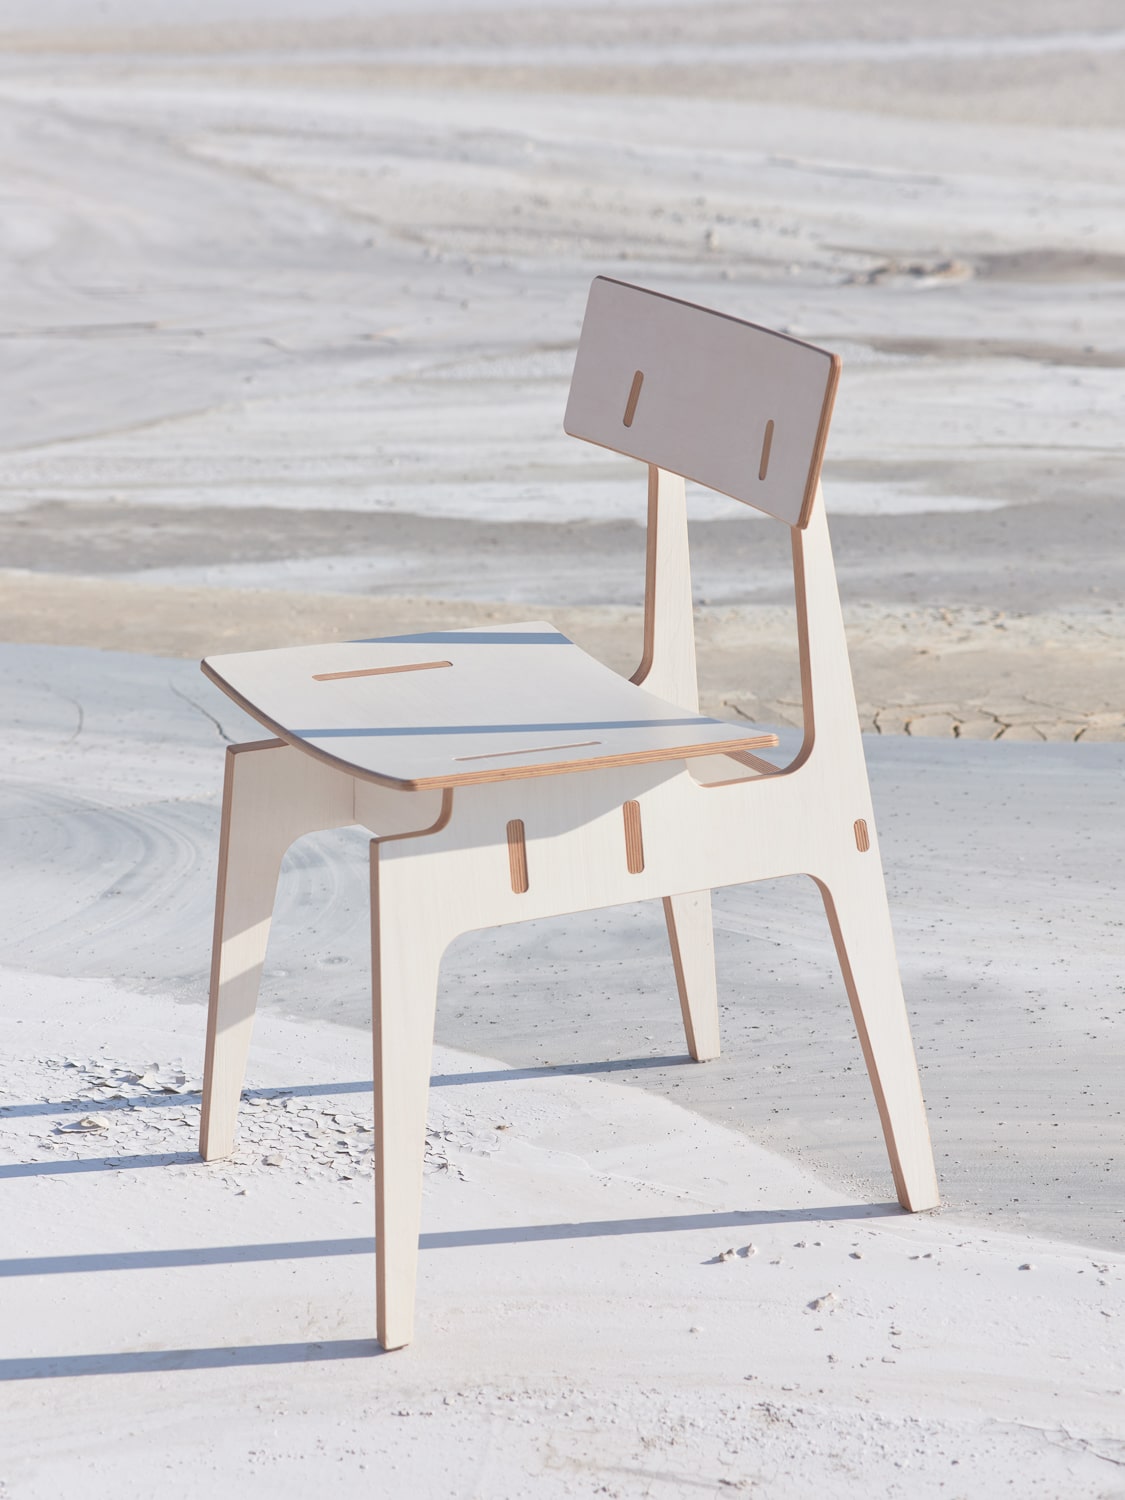 Langskip-Leidangskip-dining-room-furniture-dining-chair-and-dining-table-flat-pack-interior-furniture-produced-of-birch-plywood-boards-made-in-czech-republic-designed-by-jiri-krejcirik-9